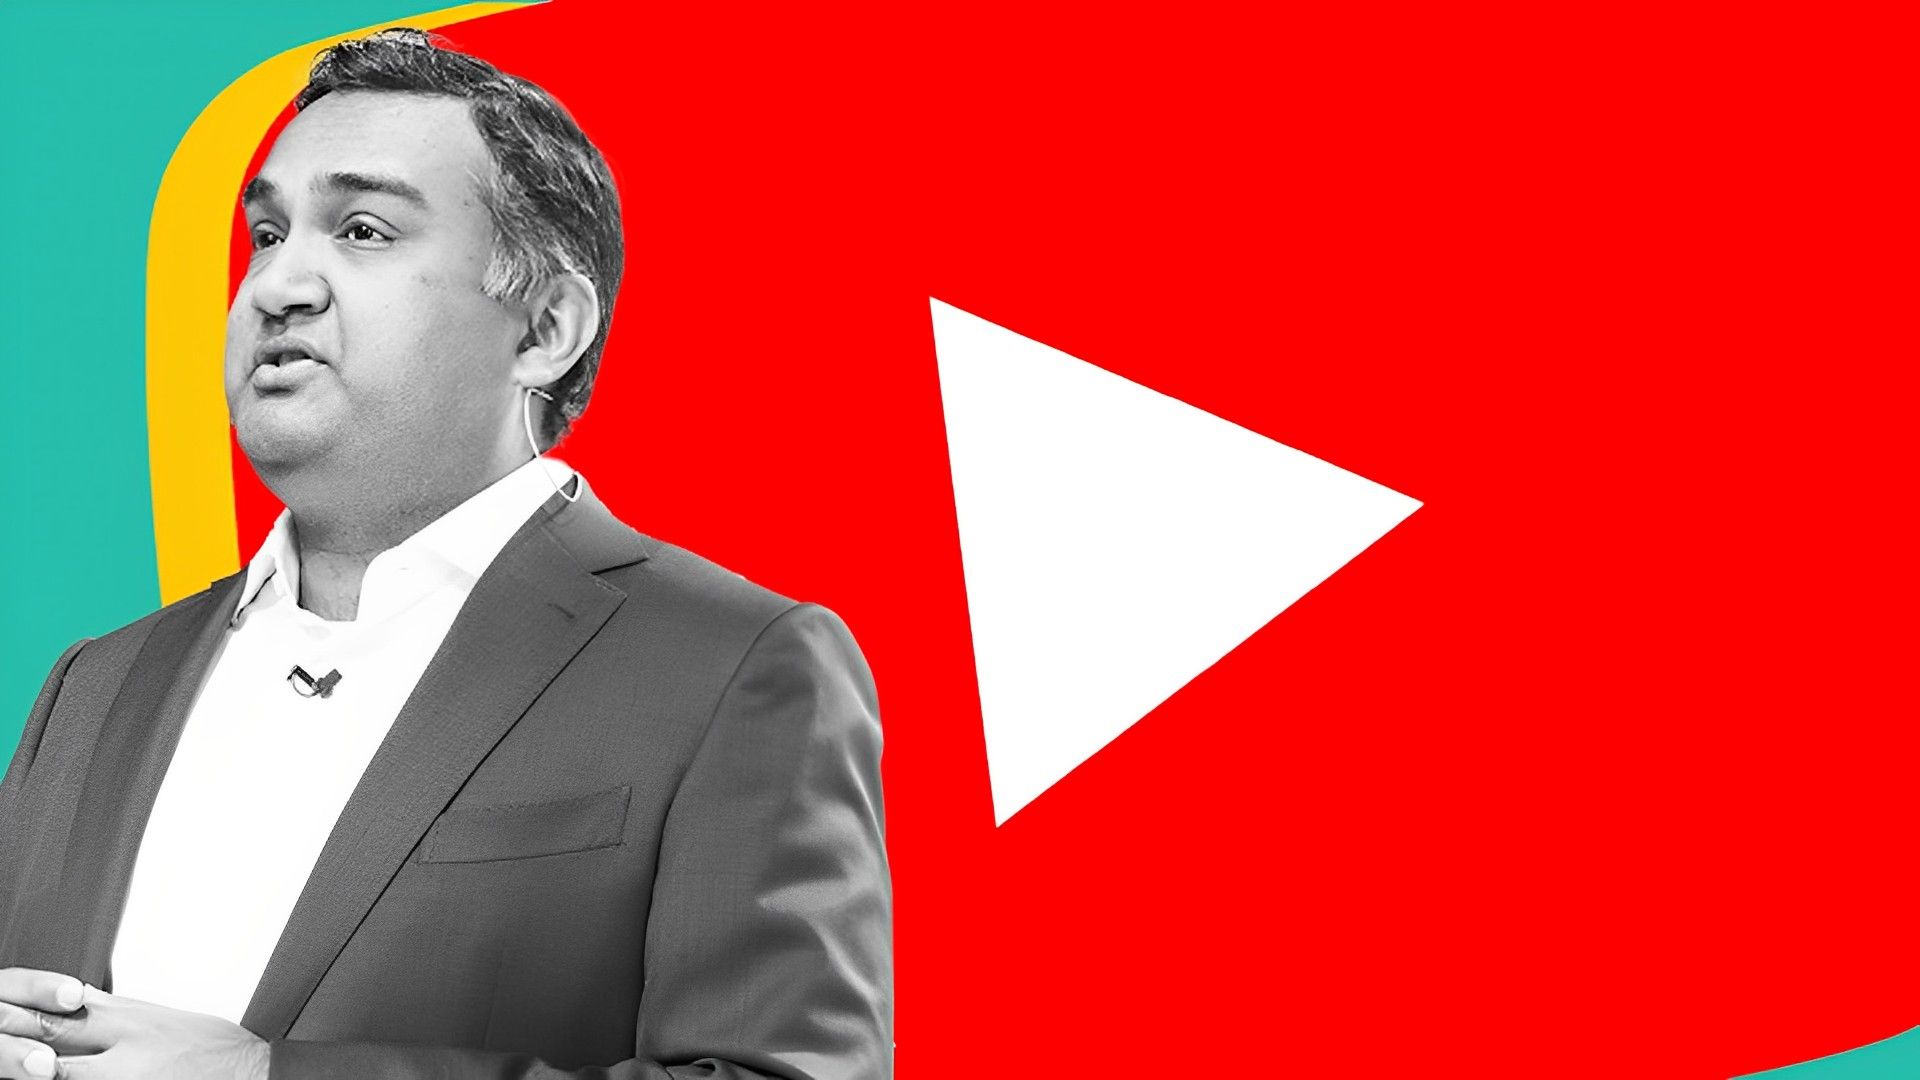 neal mohan becomes the new youtube ceo